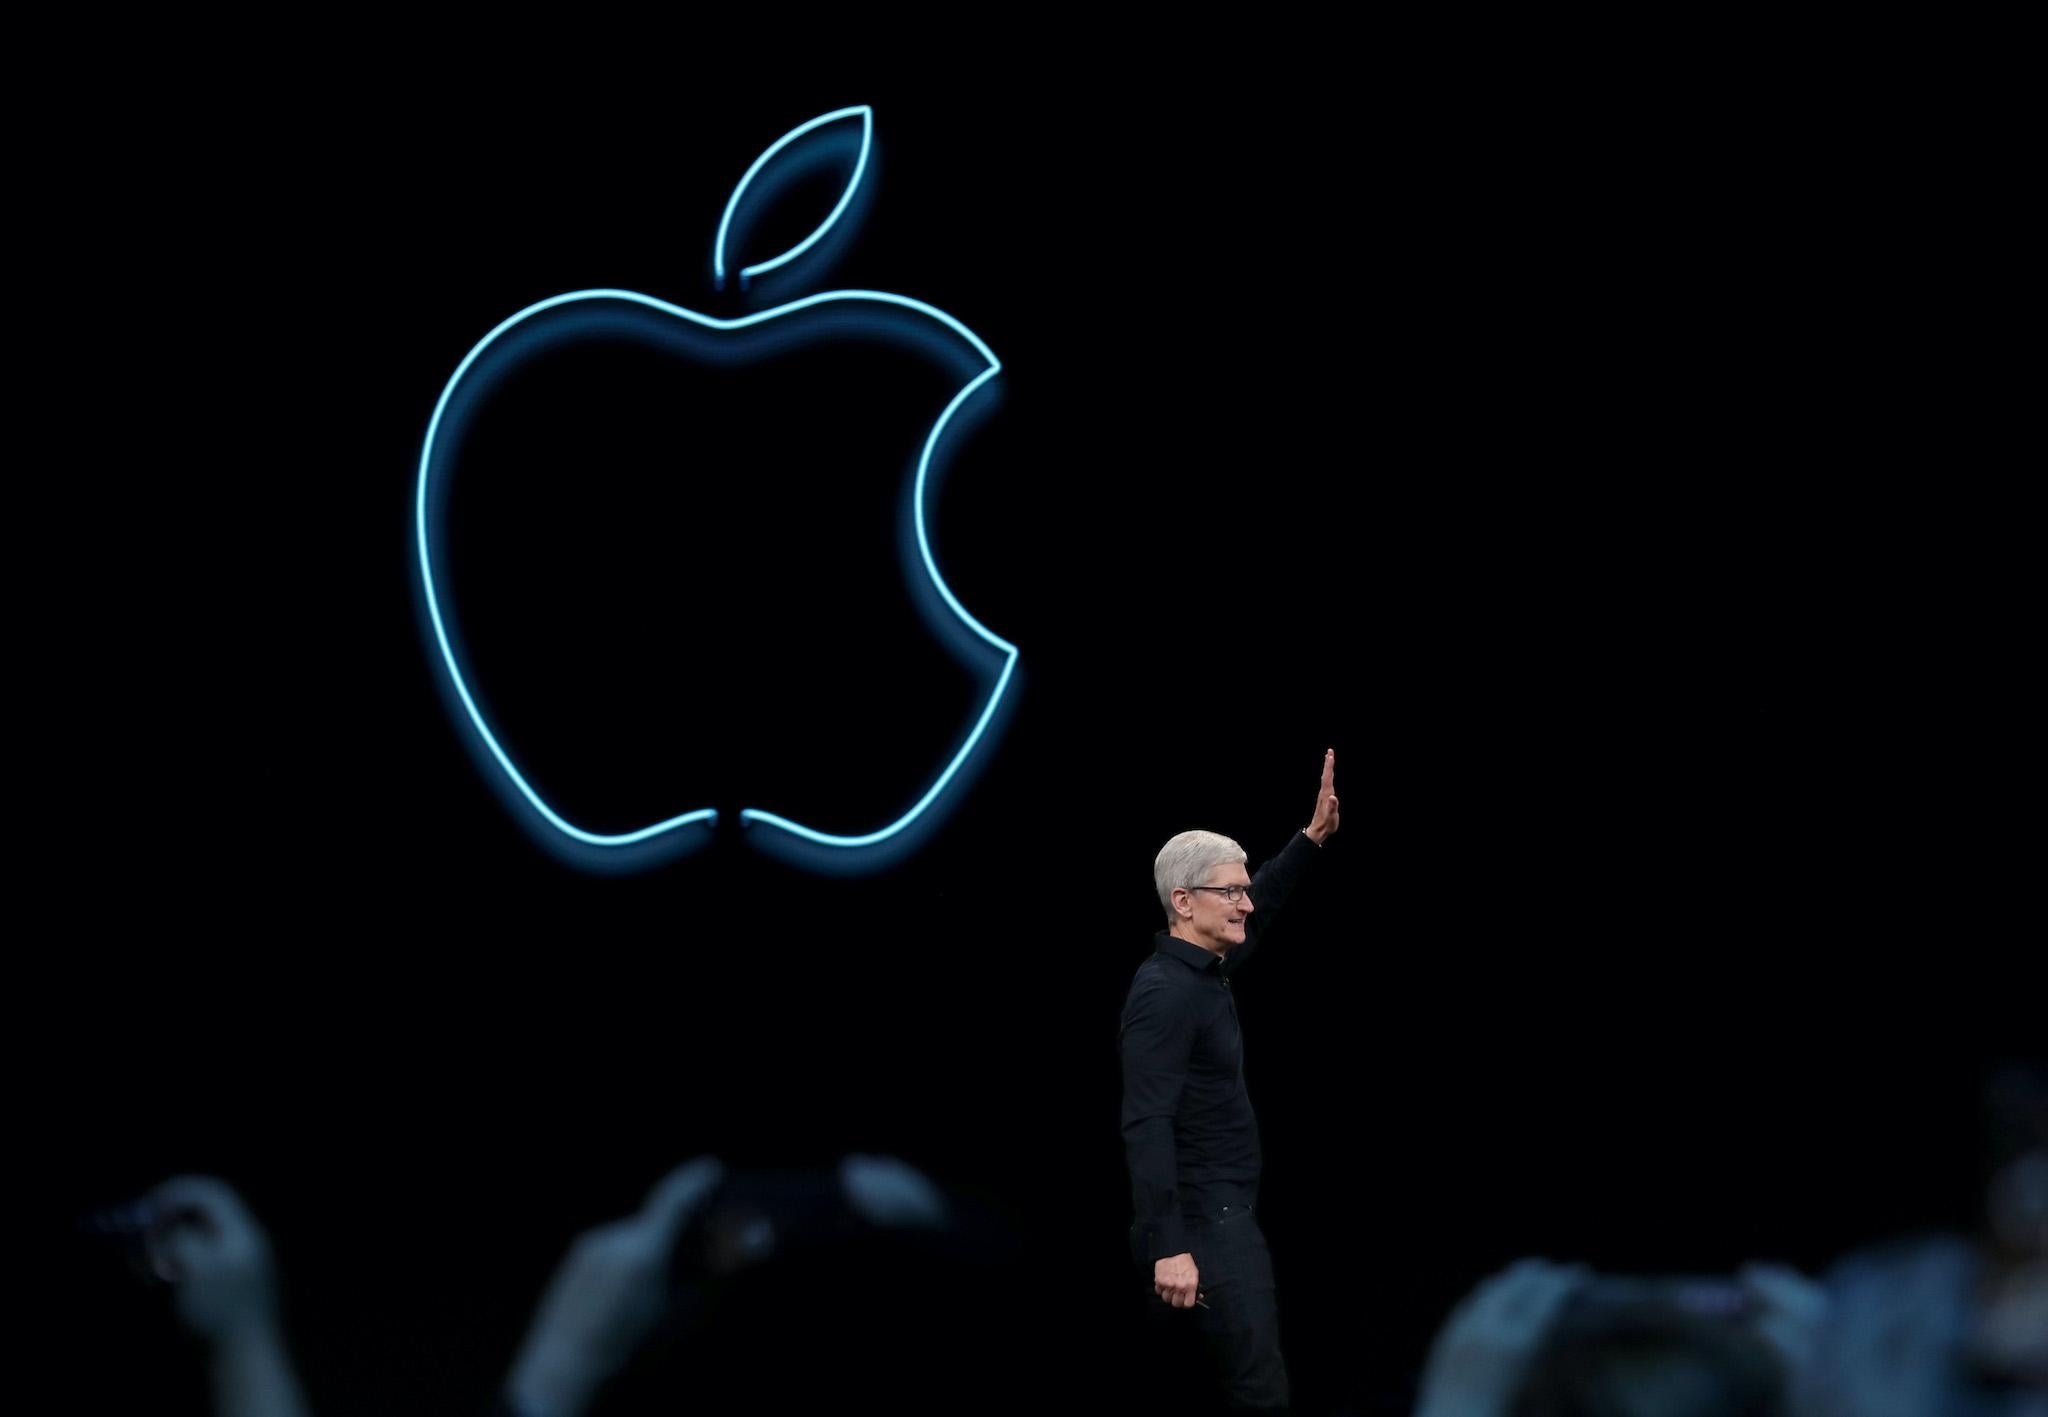 Apple CEO Tim Cook delivers the keynote address during the 2019 Apple Worldwide Developer Conference (WWDC) at the San Jose Convention Center on June 03, 2019 in San Jose, California